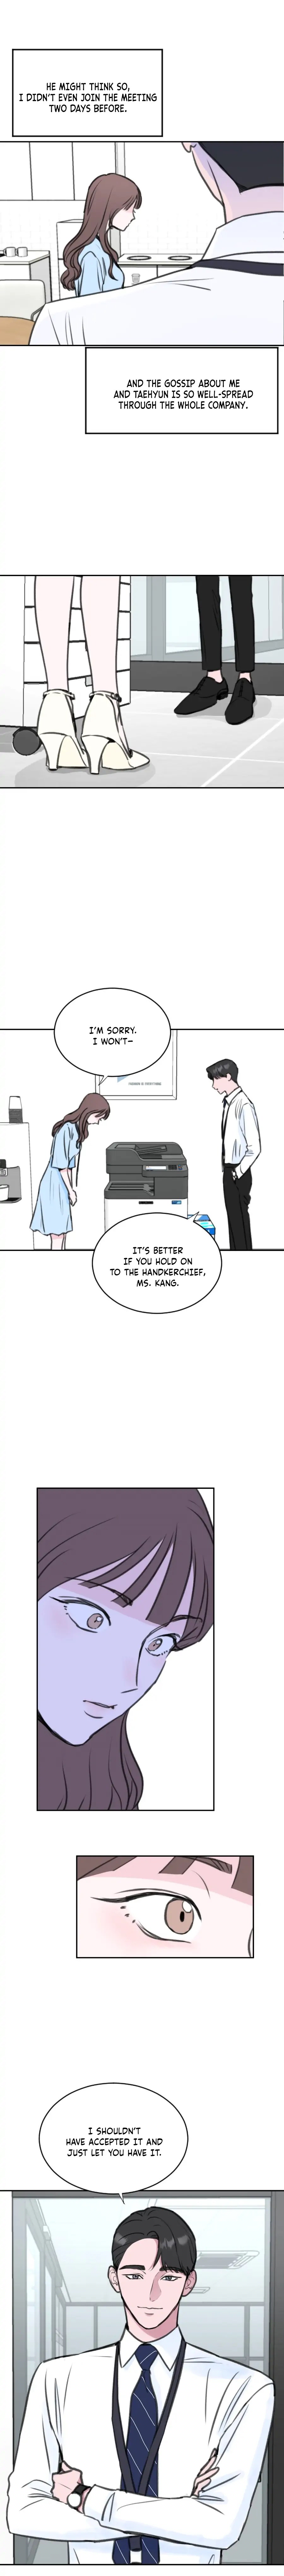 My Office Rebound Marriage - Page 3